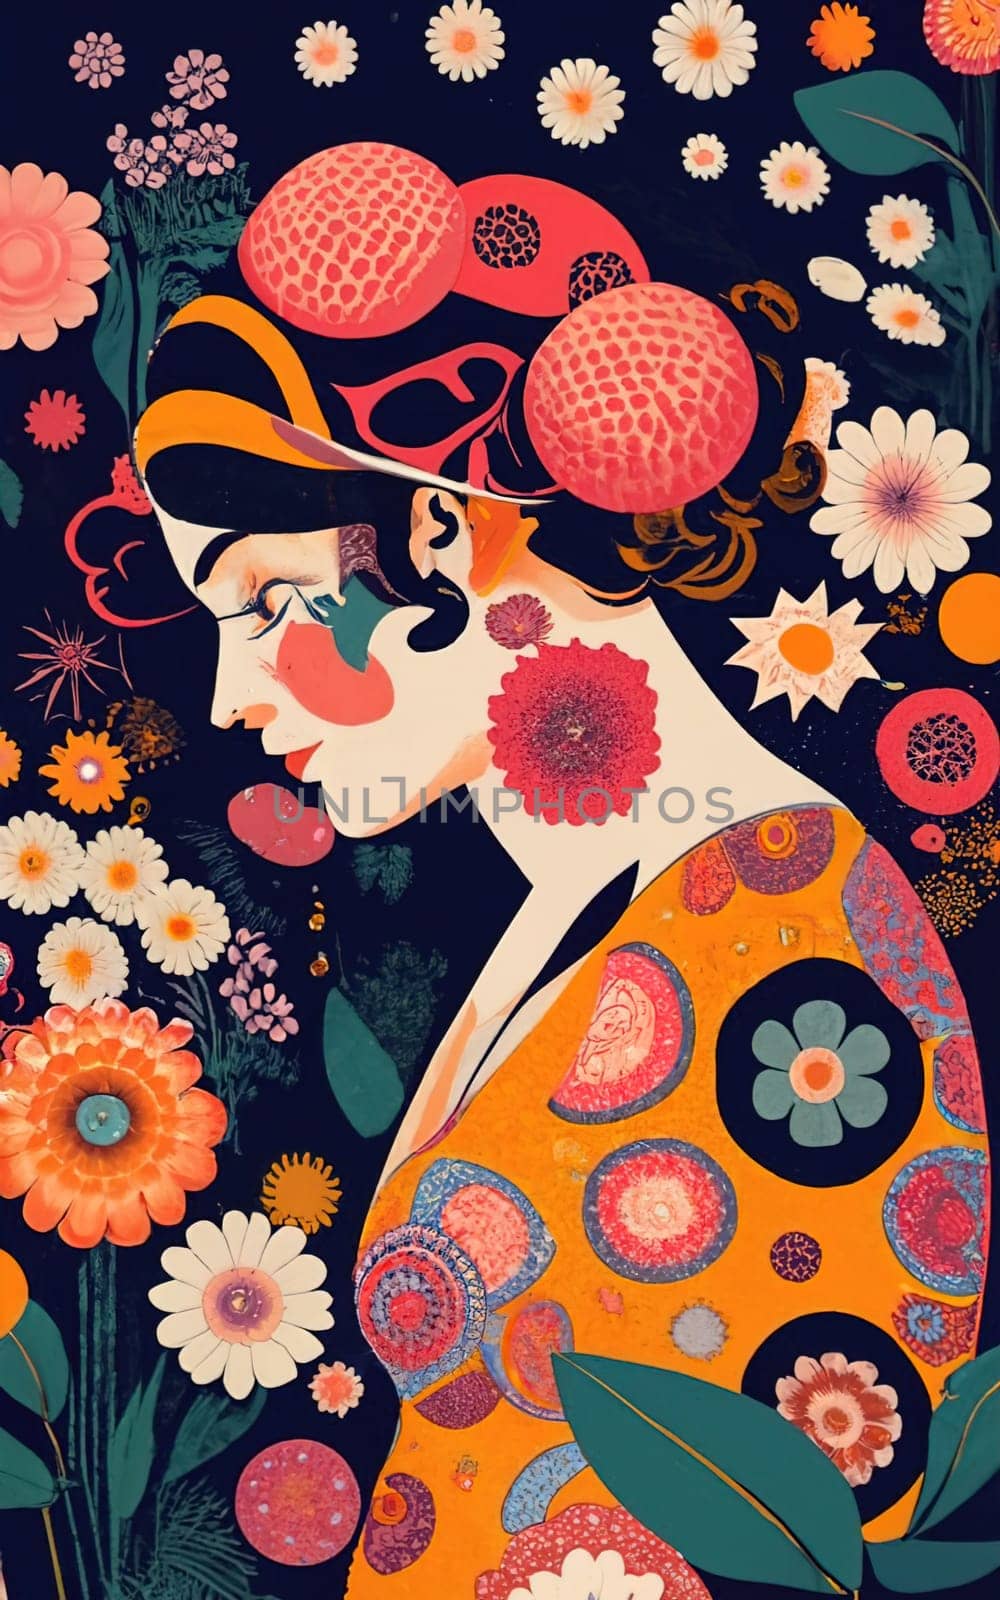 woman Flowers, polka dots and starlight background by igor010